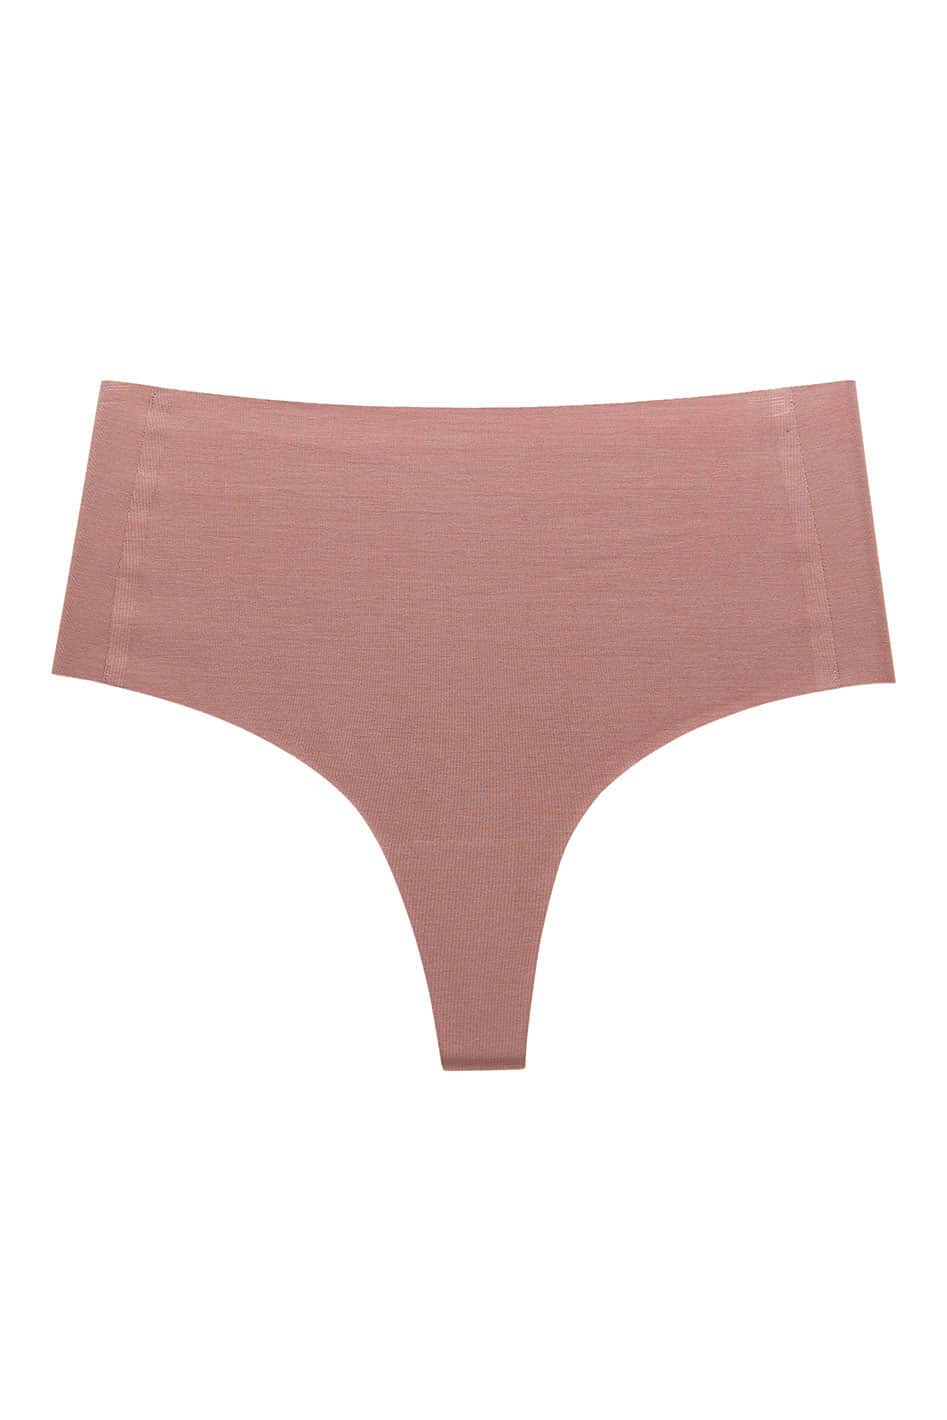 https://cdn.shopify.com/s/files/1/0528/2961/8334/products/Soft-Contour-Ultra-High-Rise-Thong-Amber-PO-Front.jpg?v=1685735325